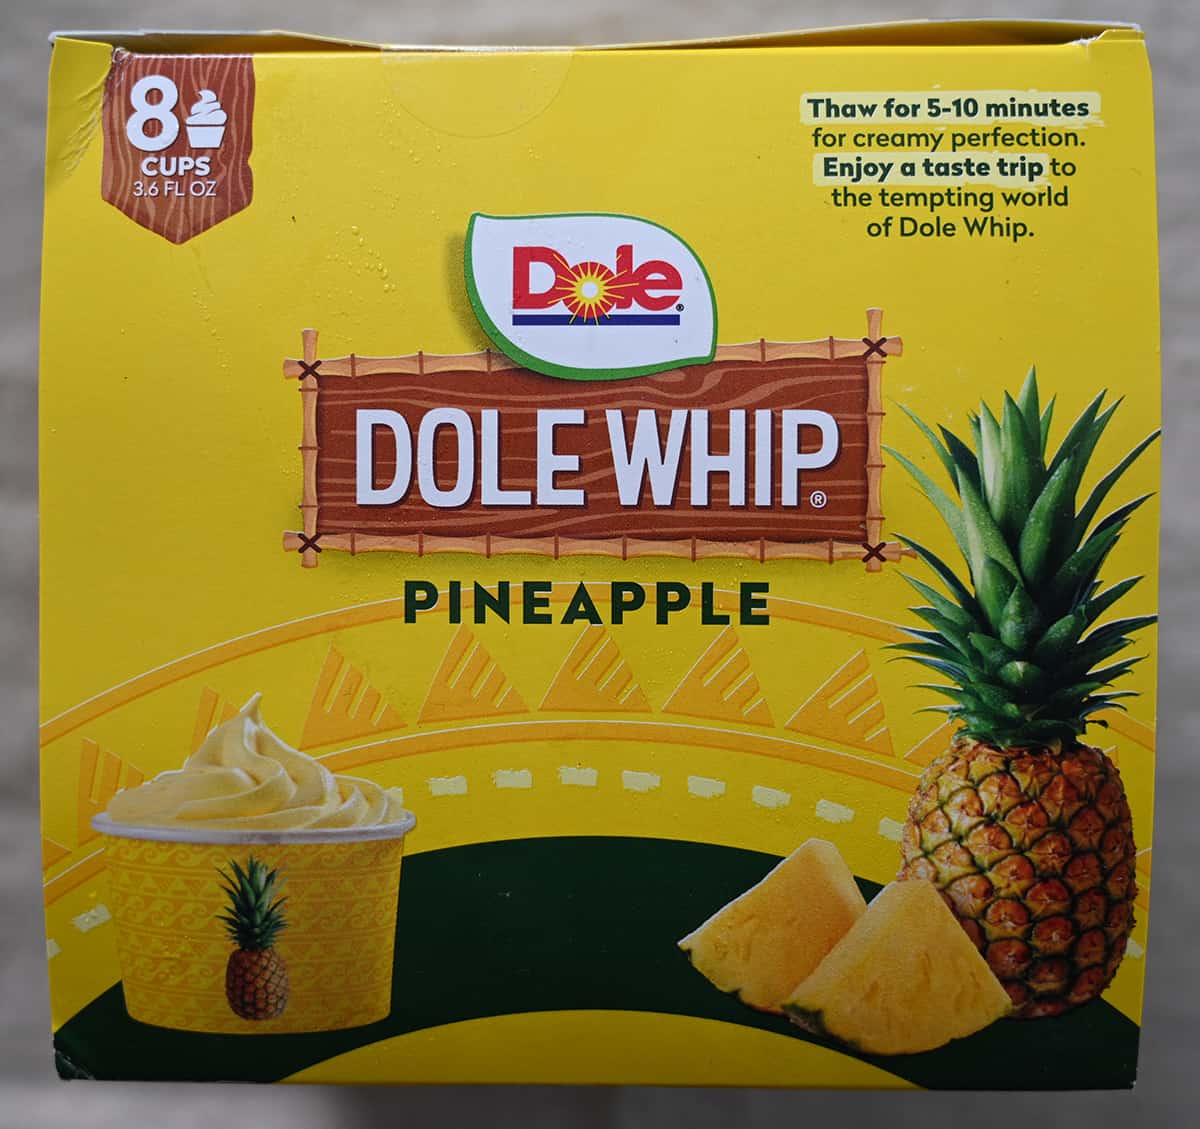 Side view image of the Dole Whip box showing how to serve the whip and that there are 8 cups in the box.